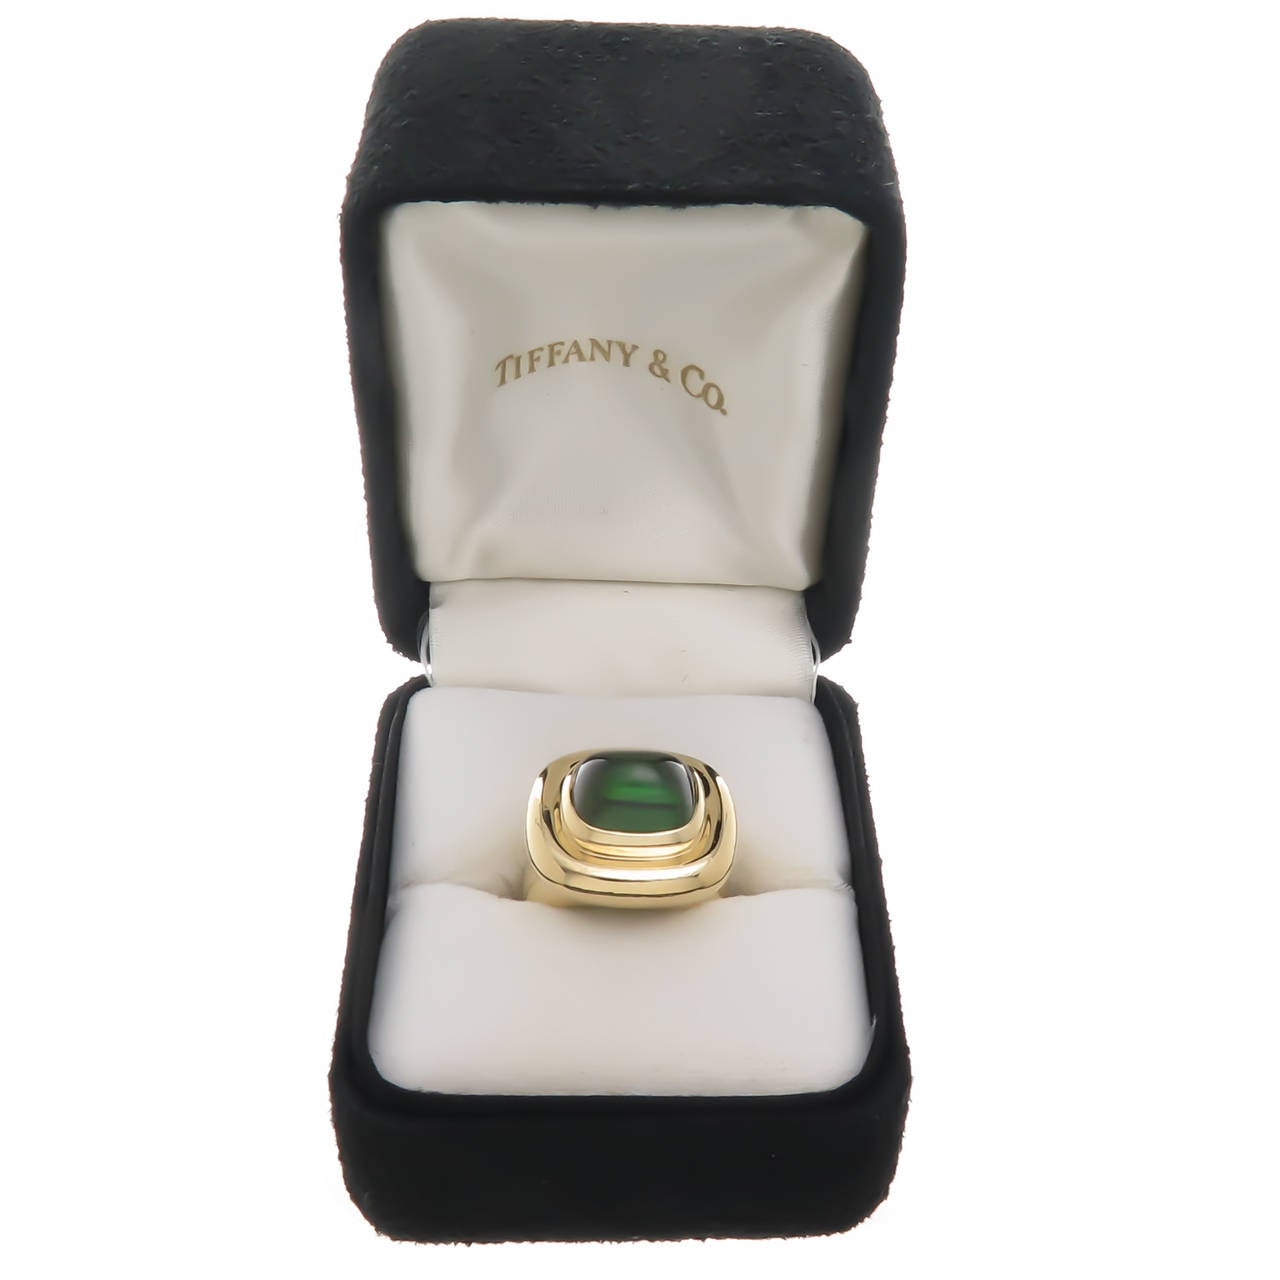 Circa 1990 18K yellow gold and cabochon tourmaline ring by Paloma Picasso for Tiffany & Co. Centrally set with a high dome cabochon deep rich green tourmaline of approximately 5 carats. Original Tiffany & Co. presentation box. Finger size = 6 1/2